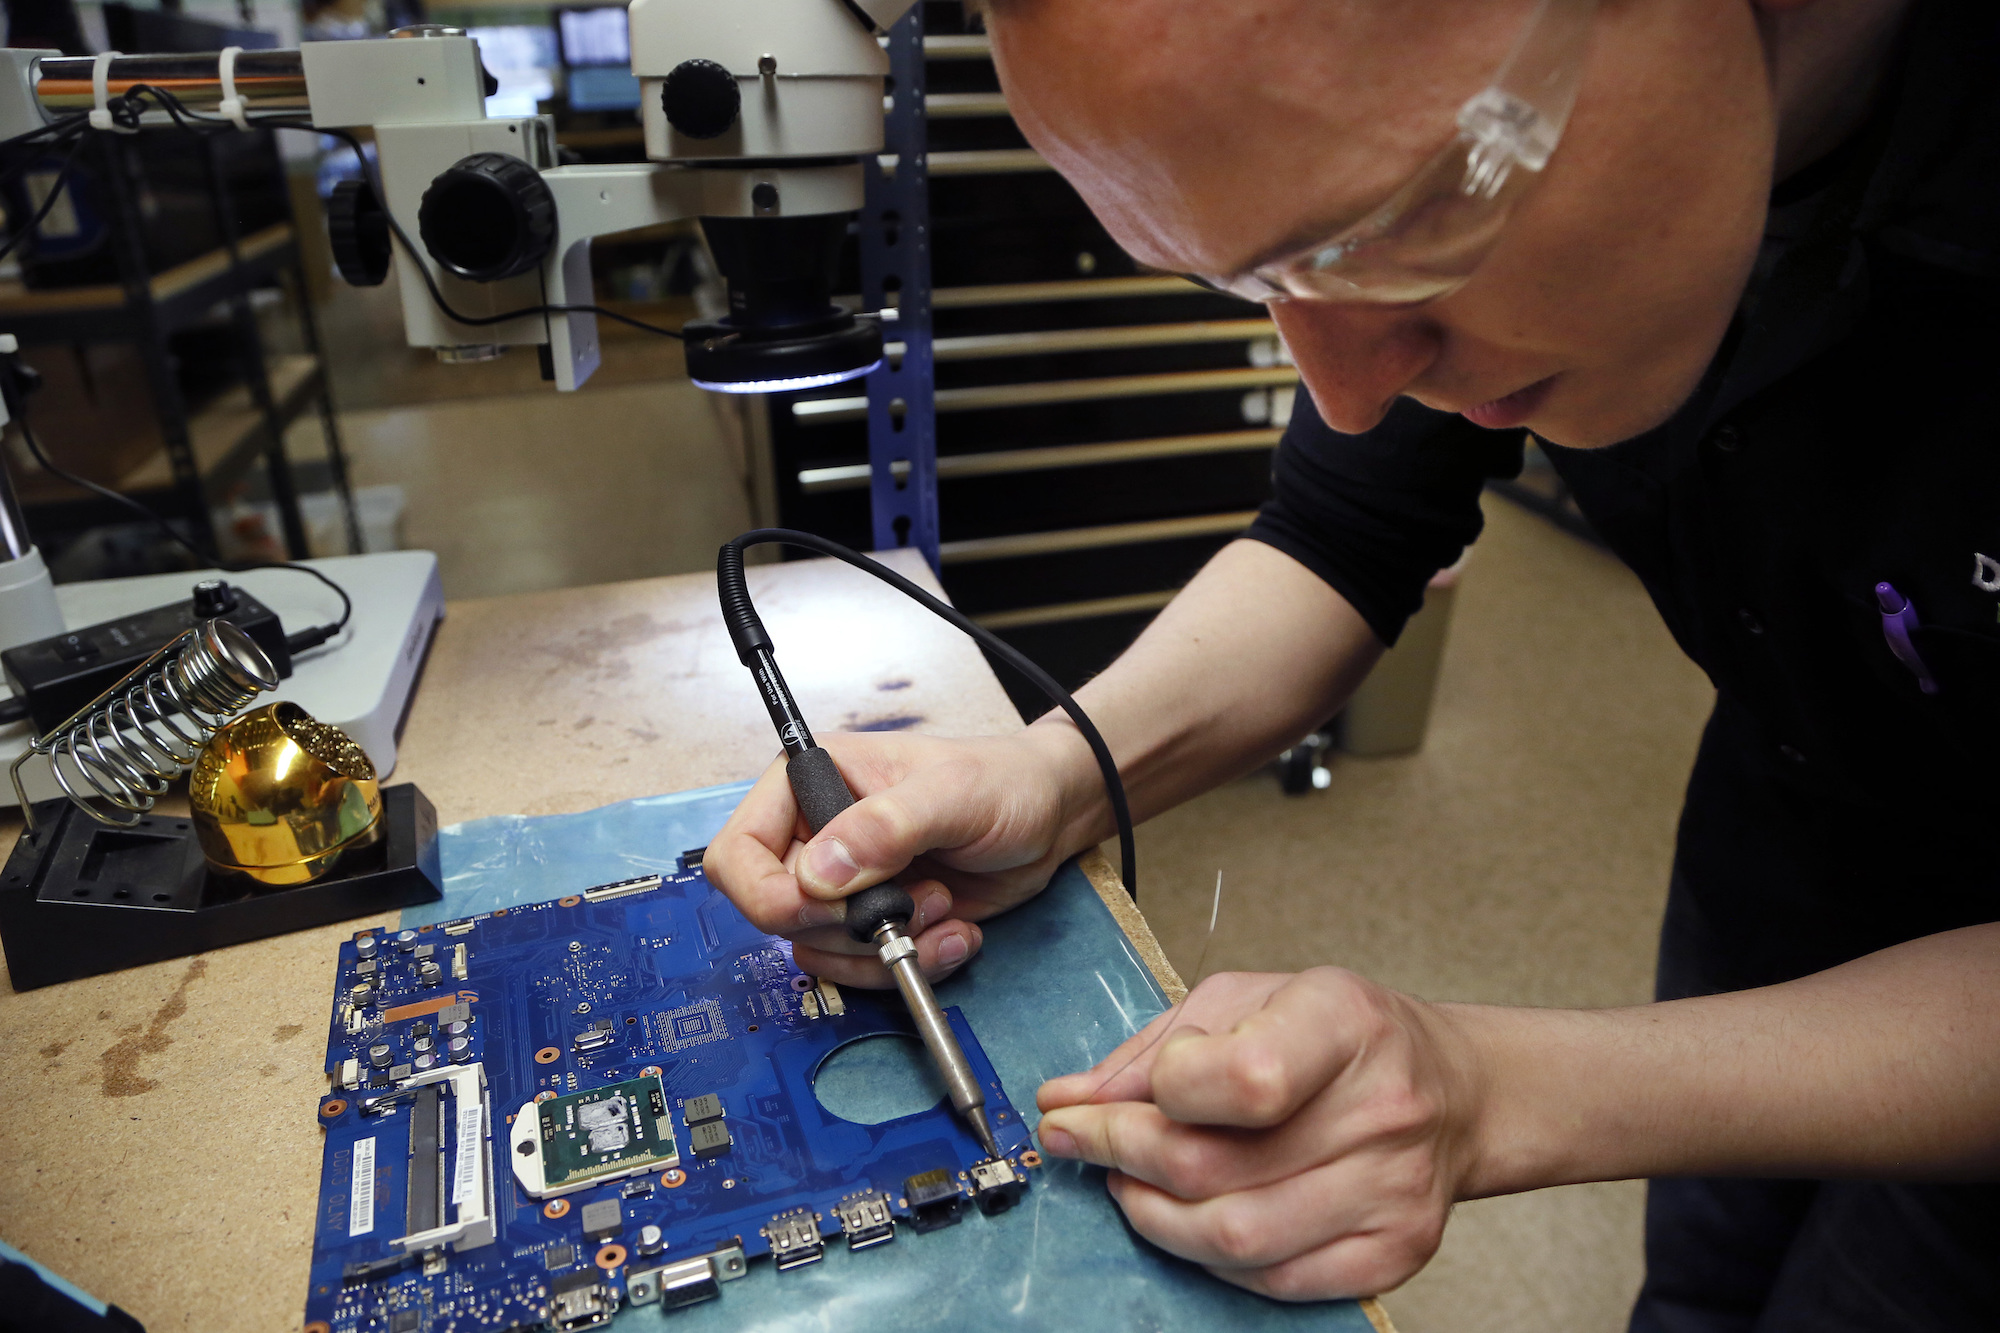 A photo of a man wearing goggles leaning over blue laptop motherboard while holding a tool